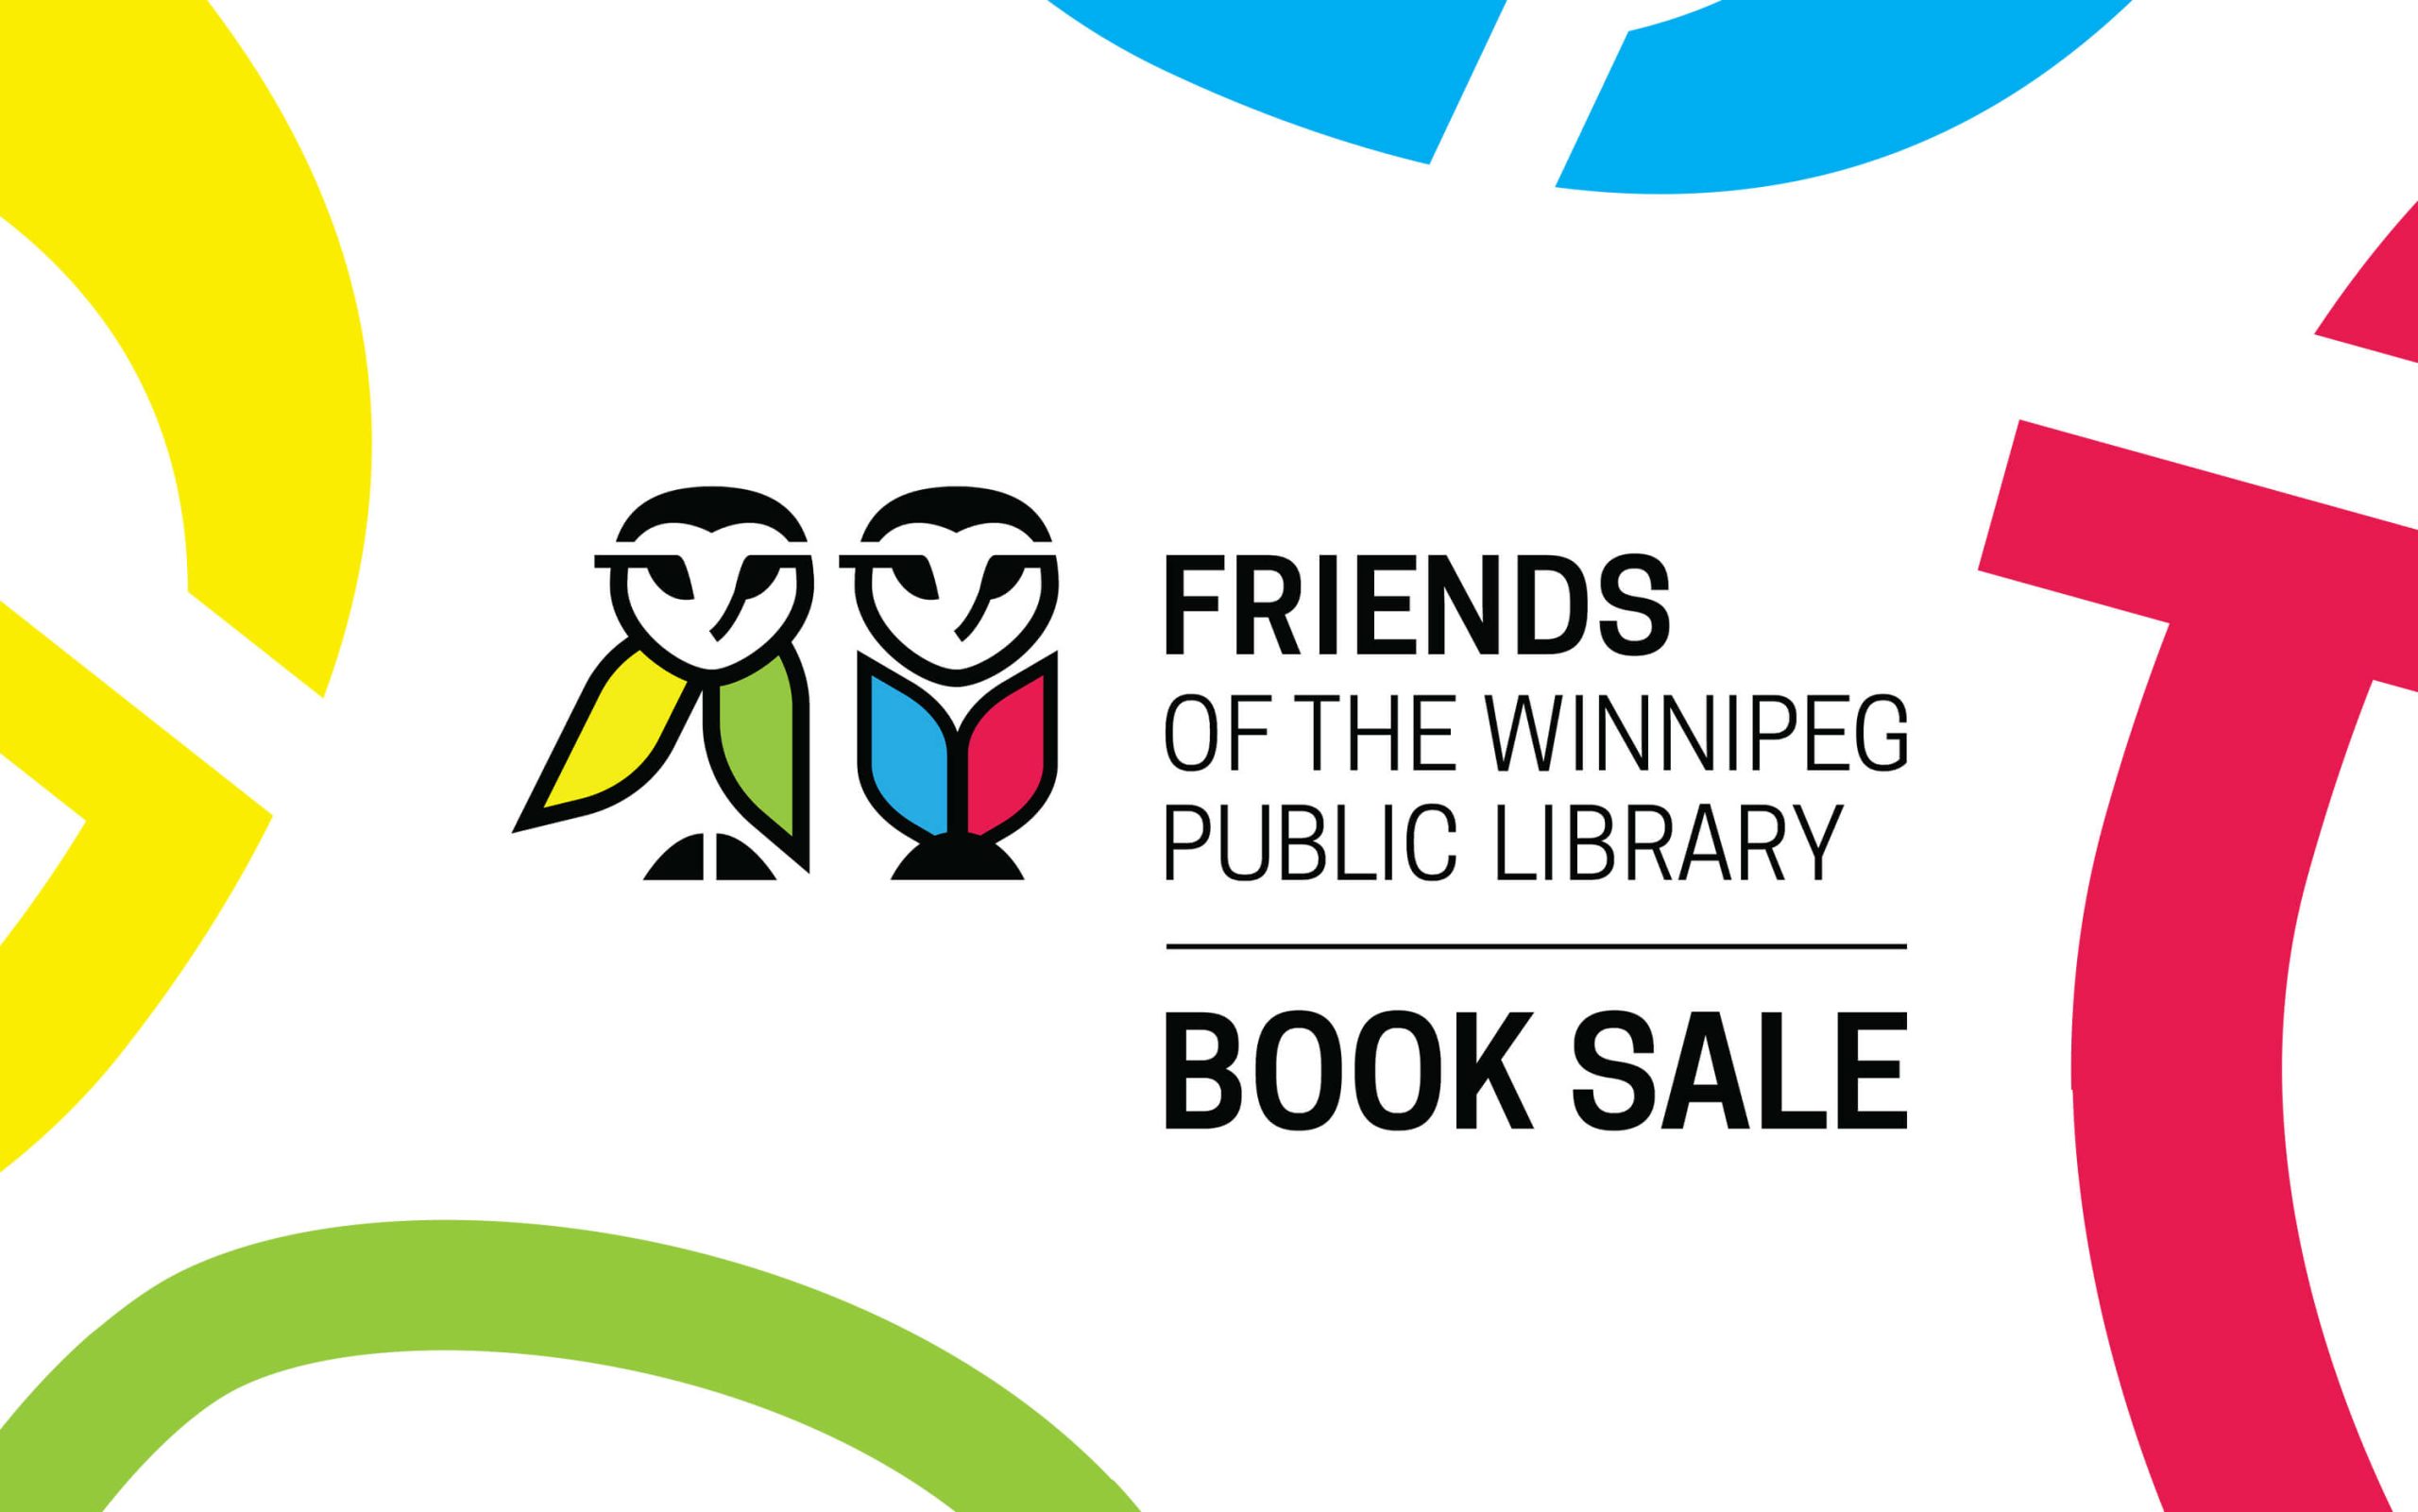 Featured image of the Friends of the Winnipeg Public Library Annual Book Sale